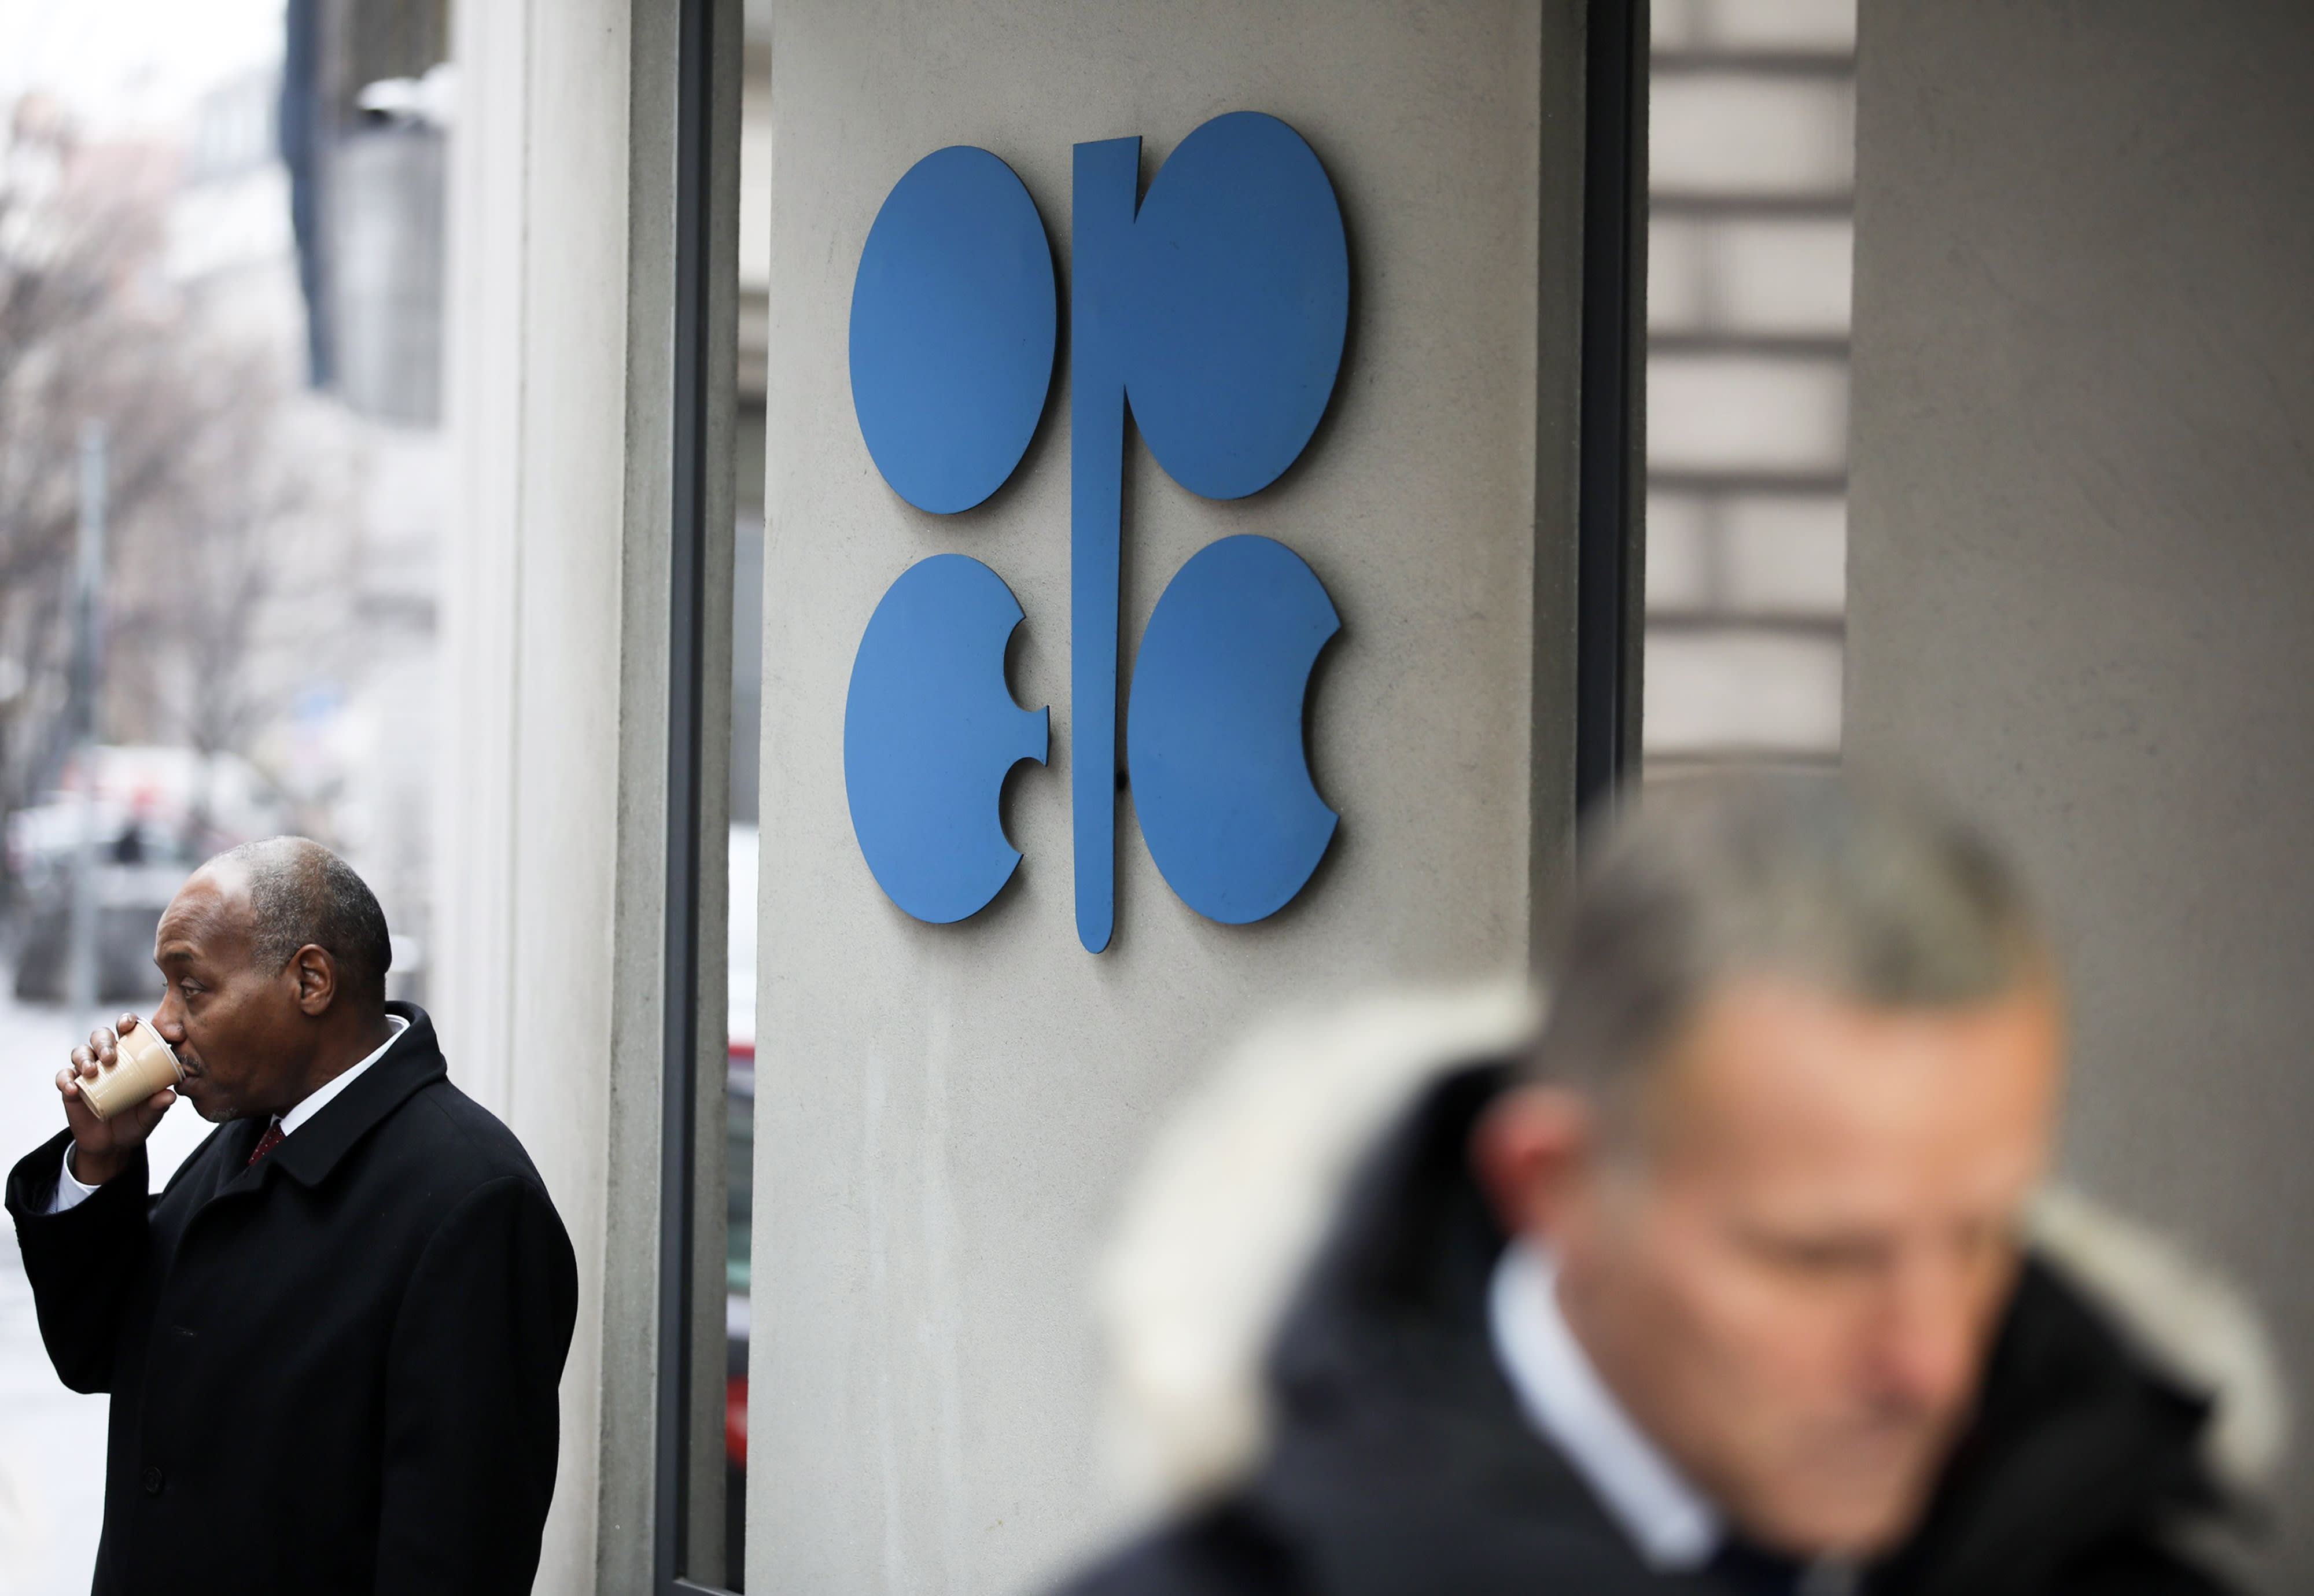 The OPEC+ spat is likely to be resolved ‘sooner rather than later,’ energy analyst says